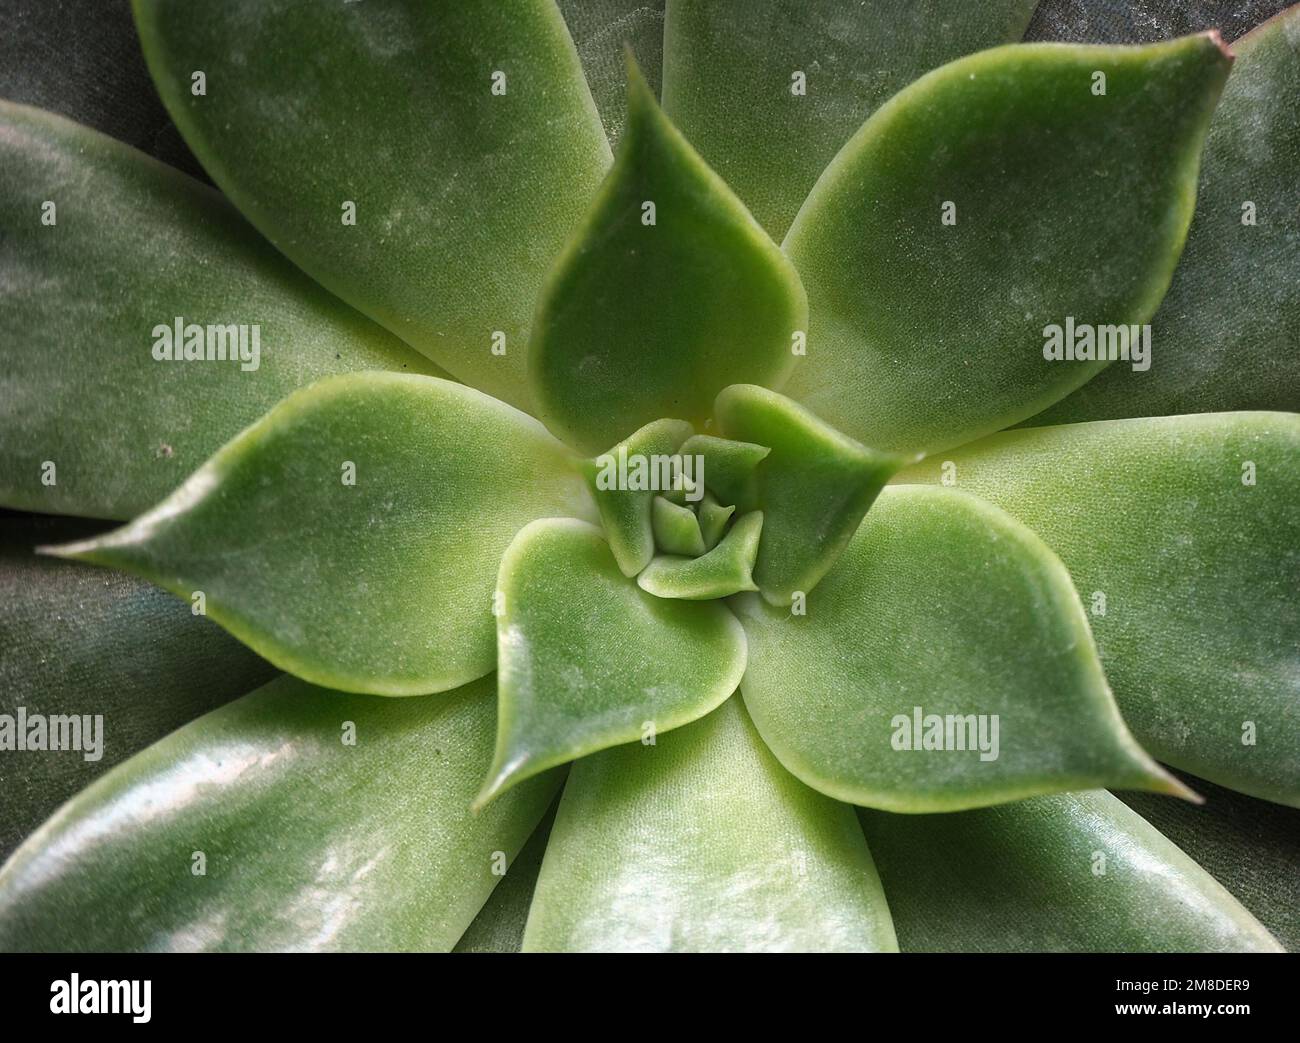 Lipstick echeveria.Cactus plant pattern wallpaper. Succulent cactus patterns.Close up of the greeny cactus leaves. Top view image of succulent bloom. Stock Photo